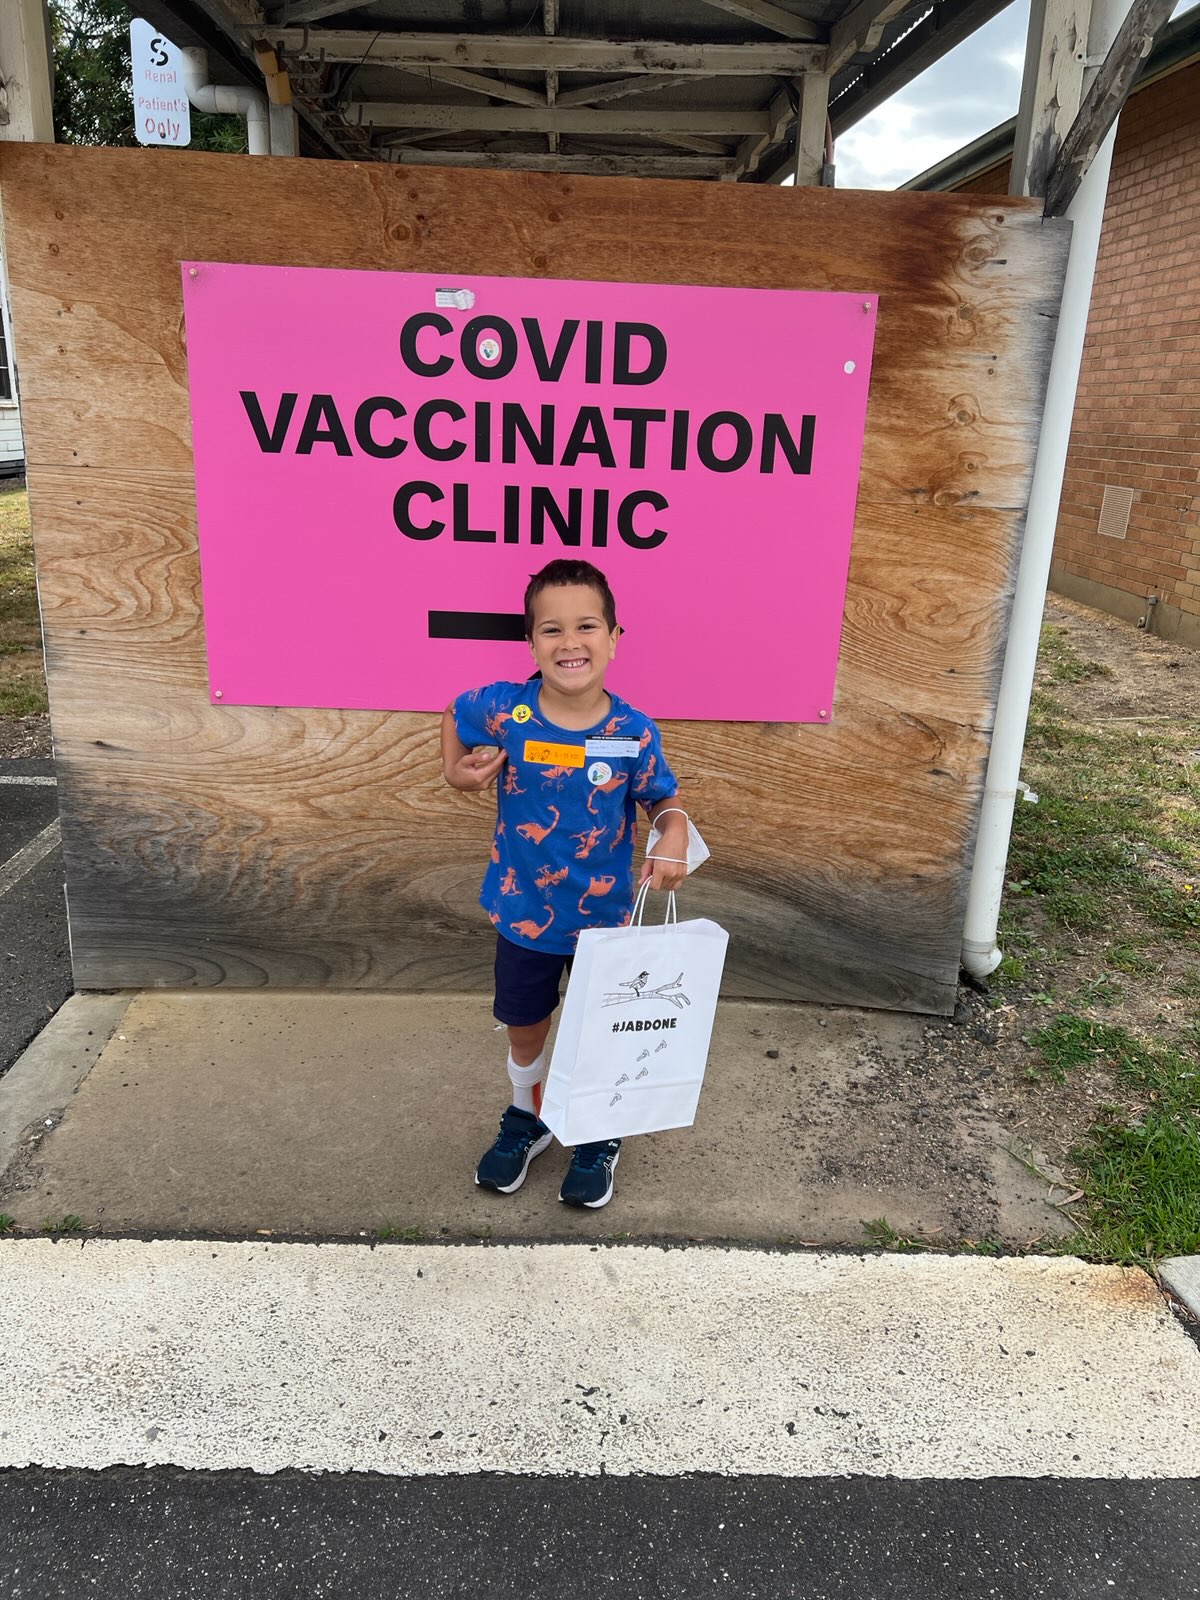 Children  aged 5-11 in Australia can now get vaccinated against Covid19.